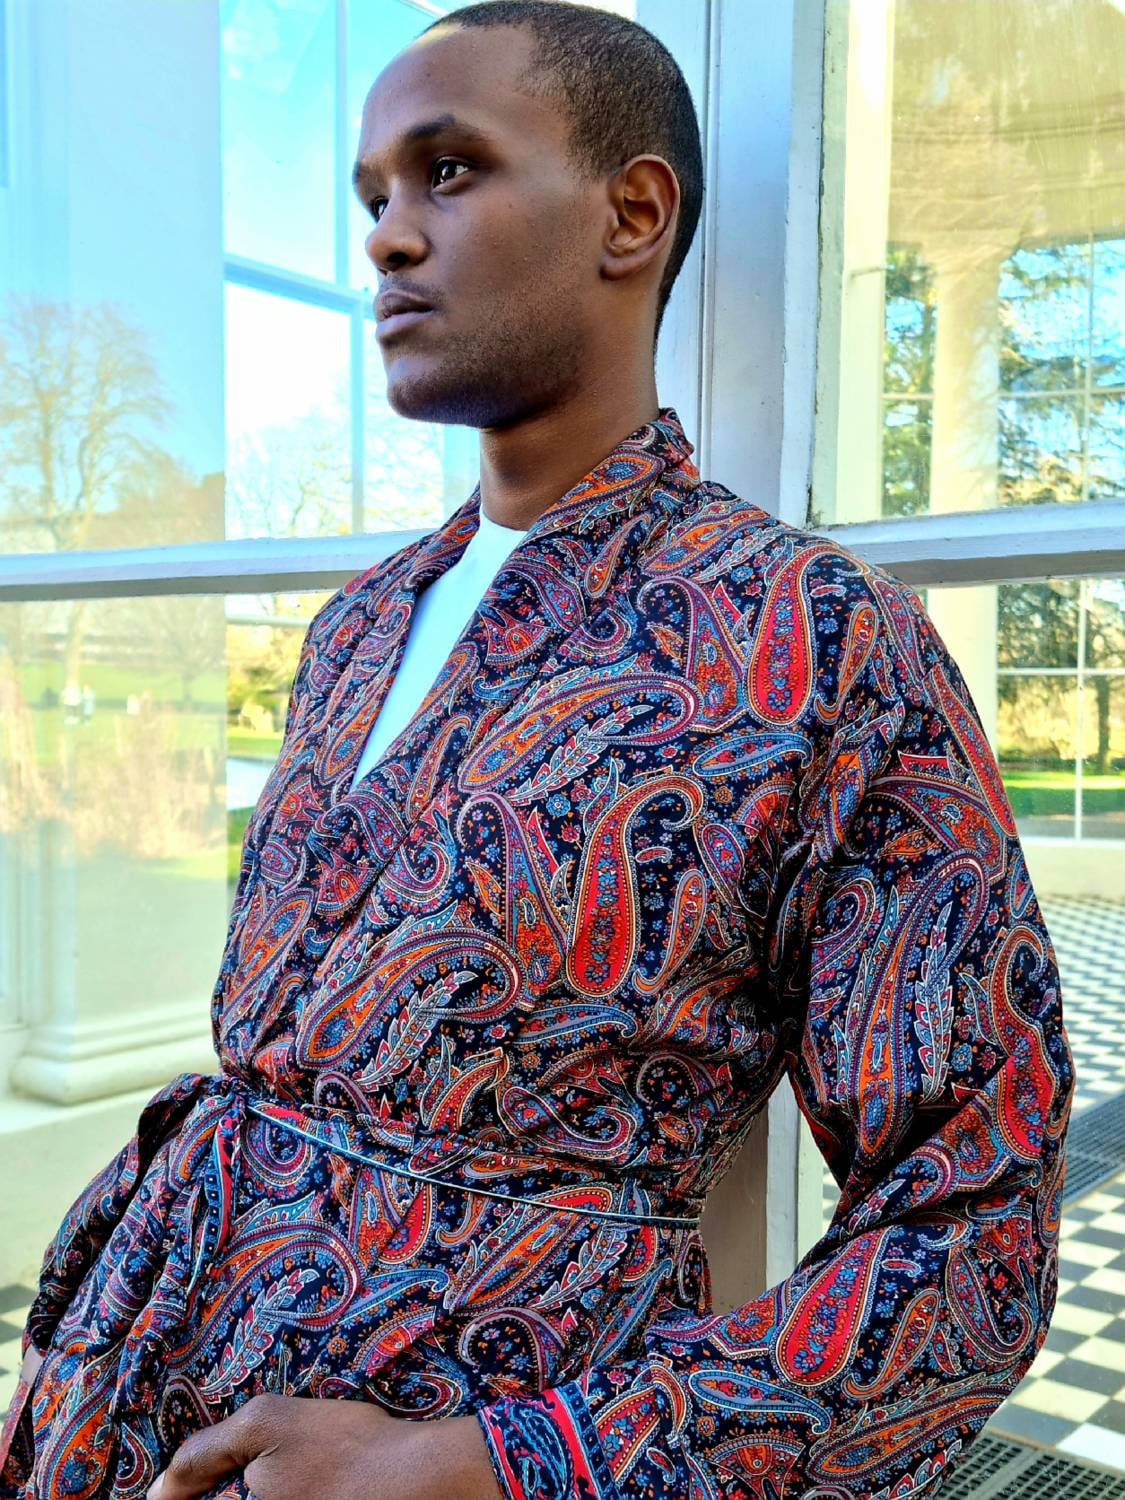 Mens Lightweight Paisley Dressing Gown Robe